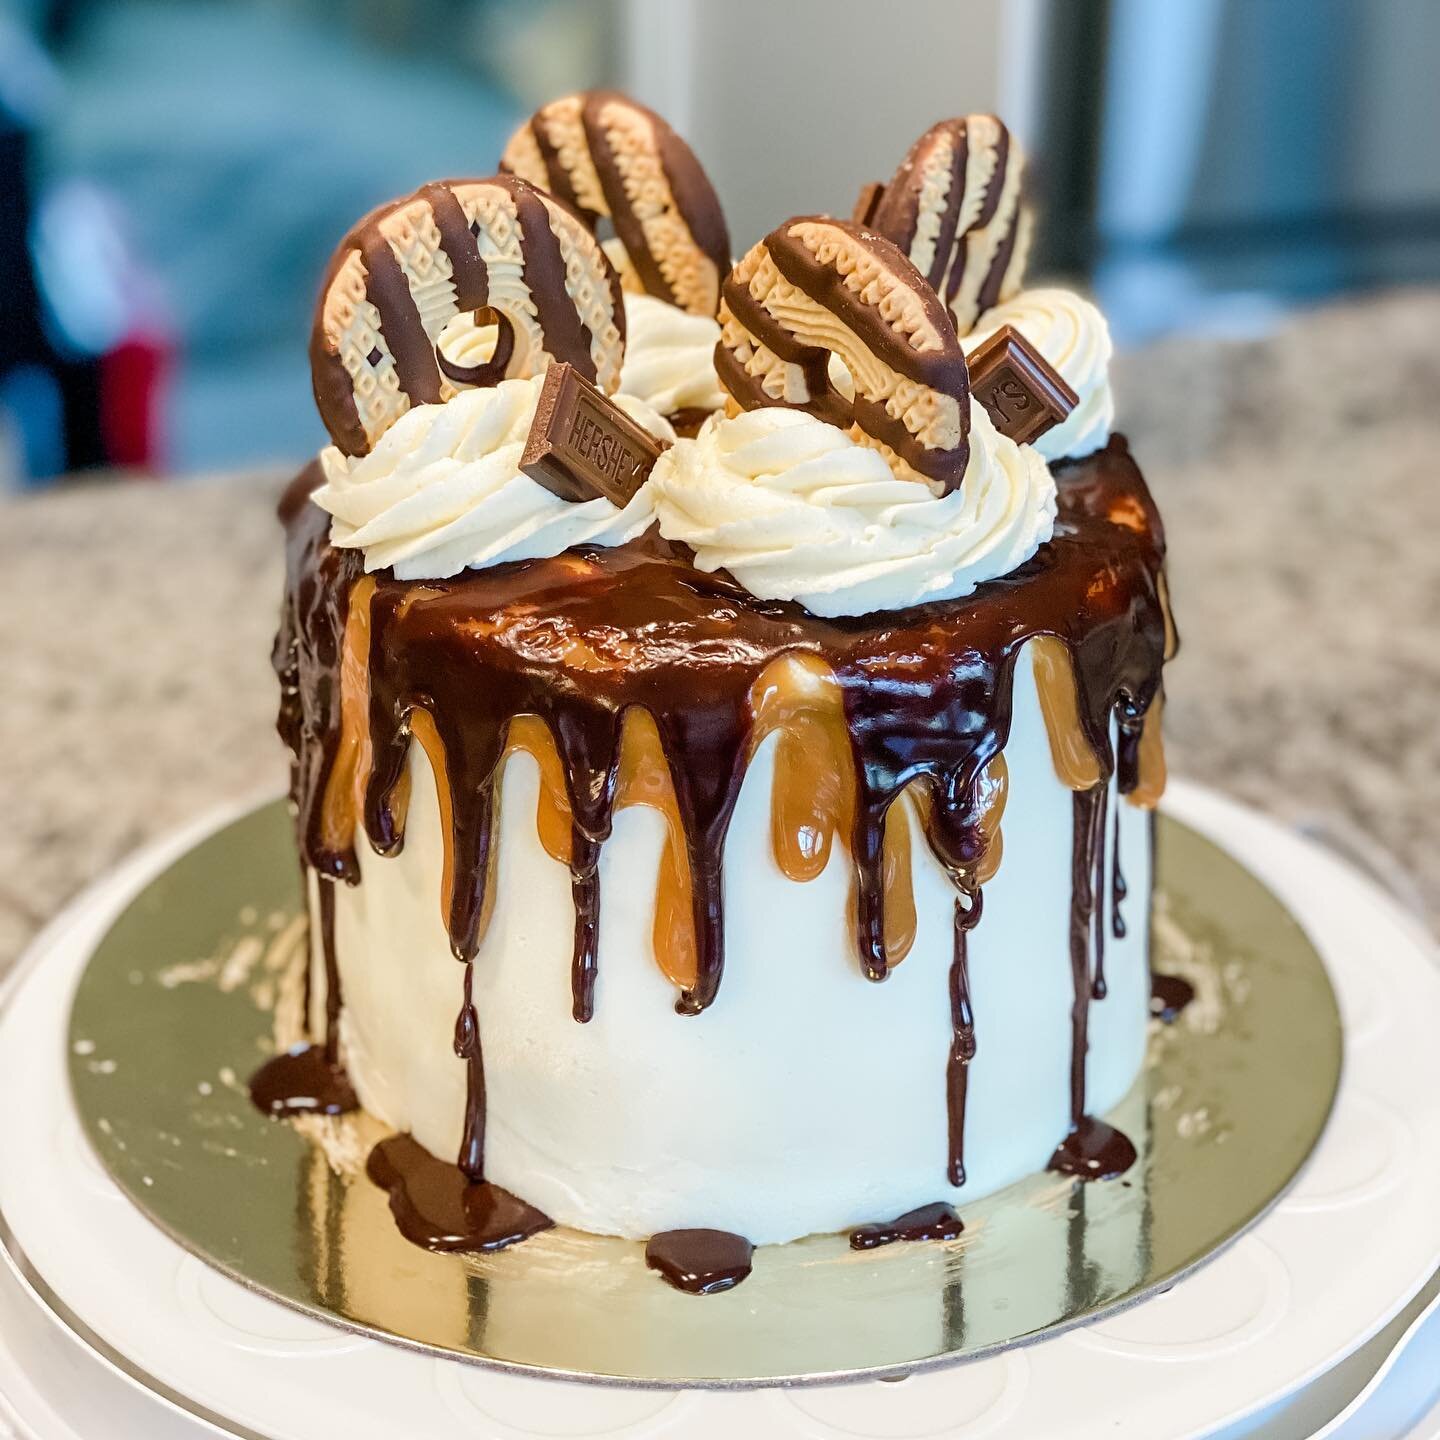 Had a bit of humble pie this week, or should I say humble cake?? 🤔 I had yet another brother in town this week and @72groundhog requested a marble cake. That was new for me, as was using caramel. I used the same caramel I use for my caramel apples a